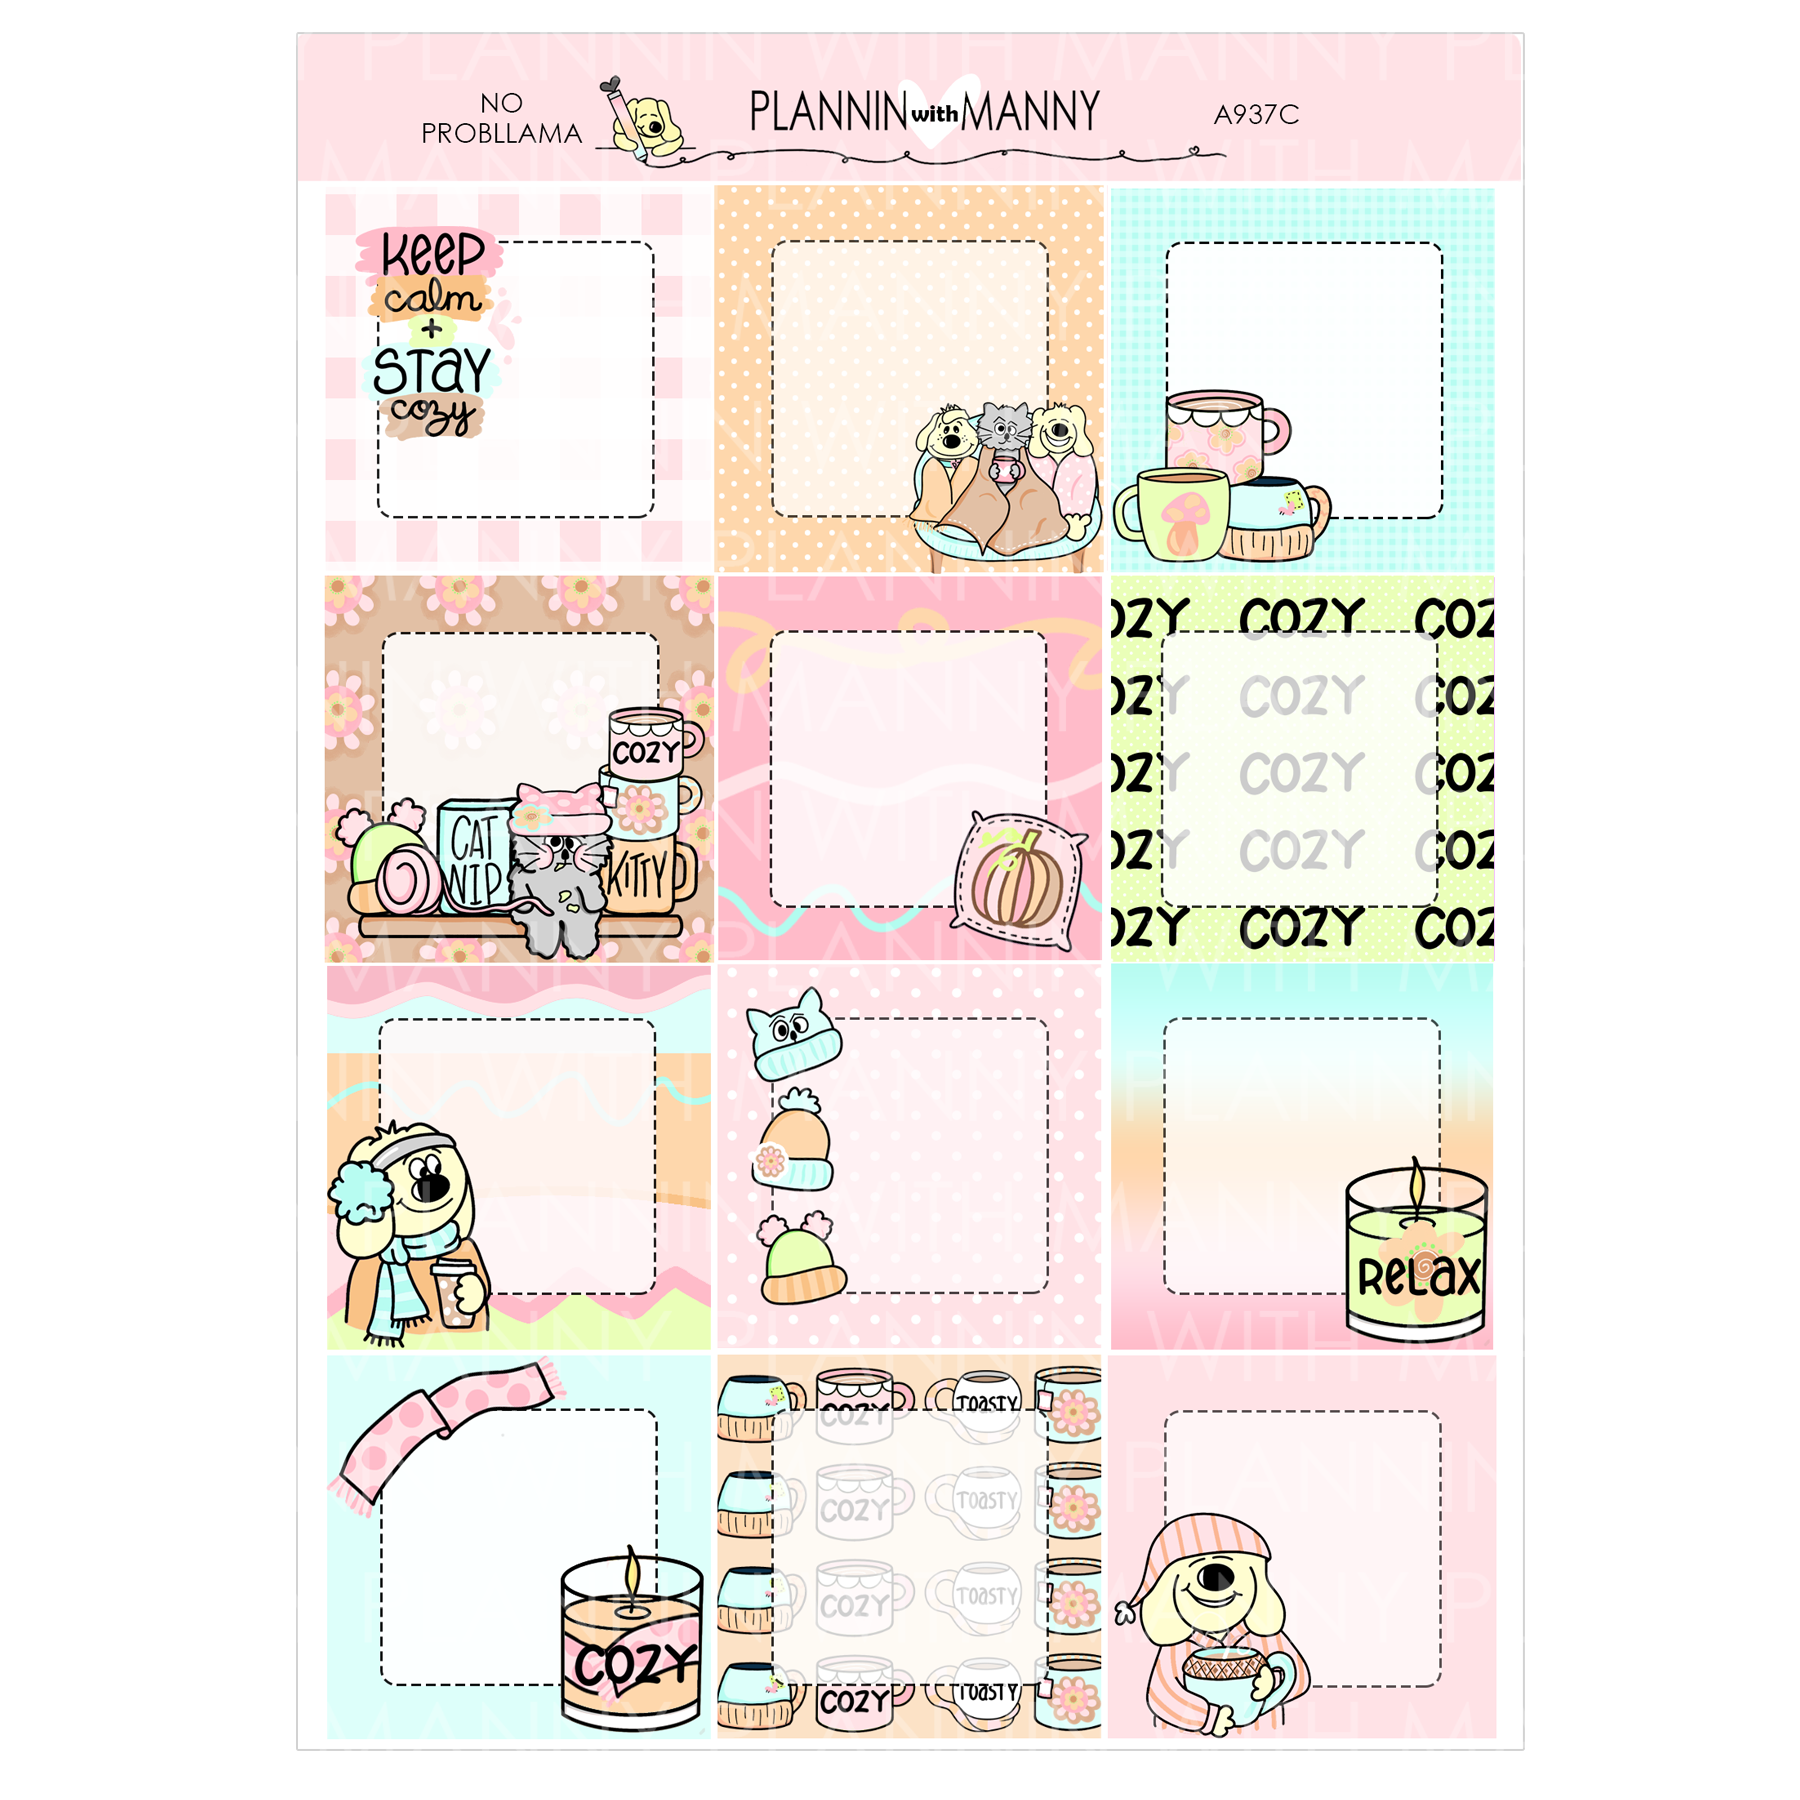 A937C Cozy Days 1.5" Square Planner Stickers